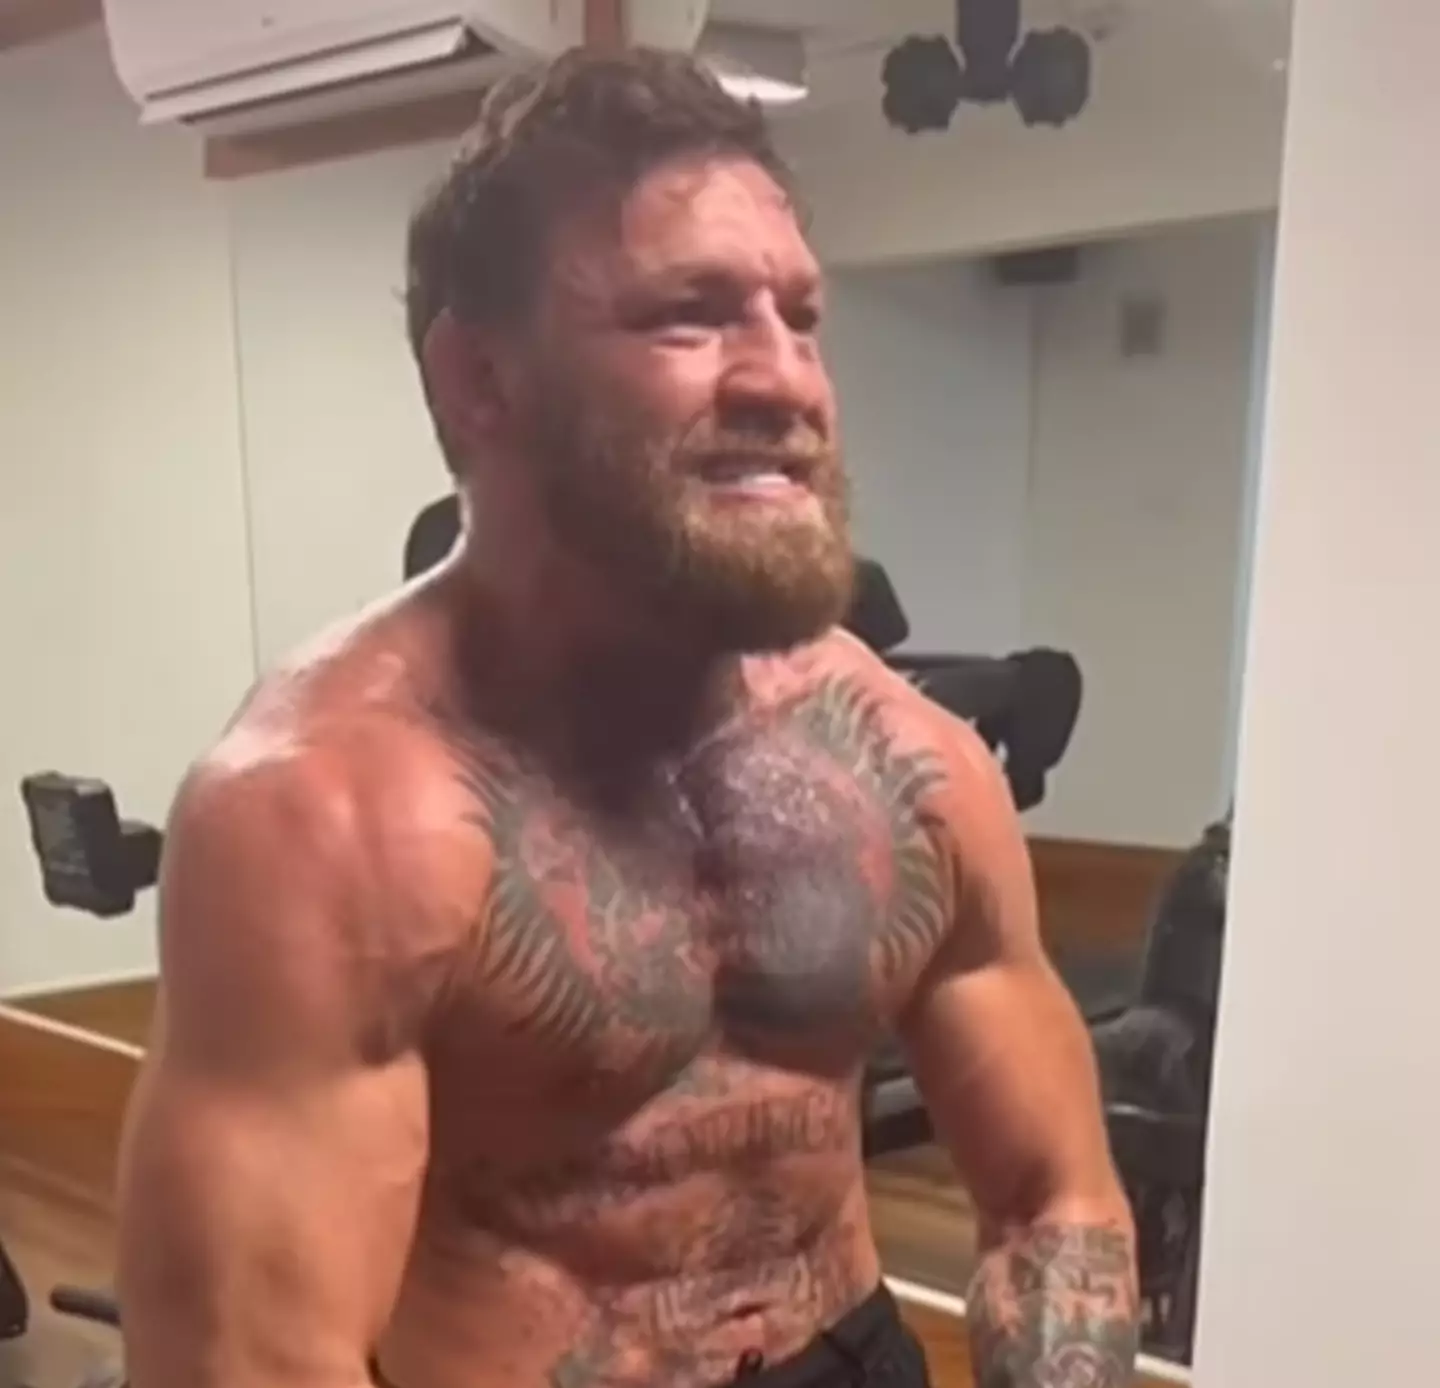 Conor McGregor responded to a commenter suggesting he is 'using' drugs.